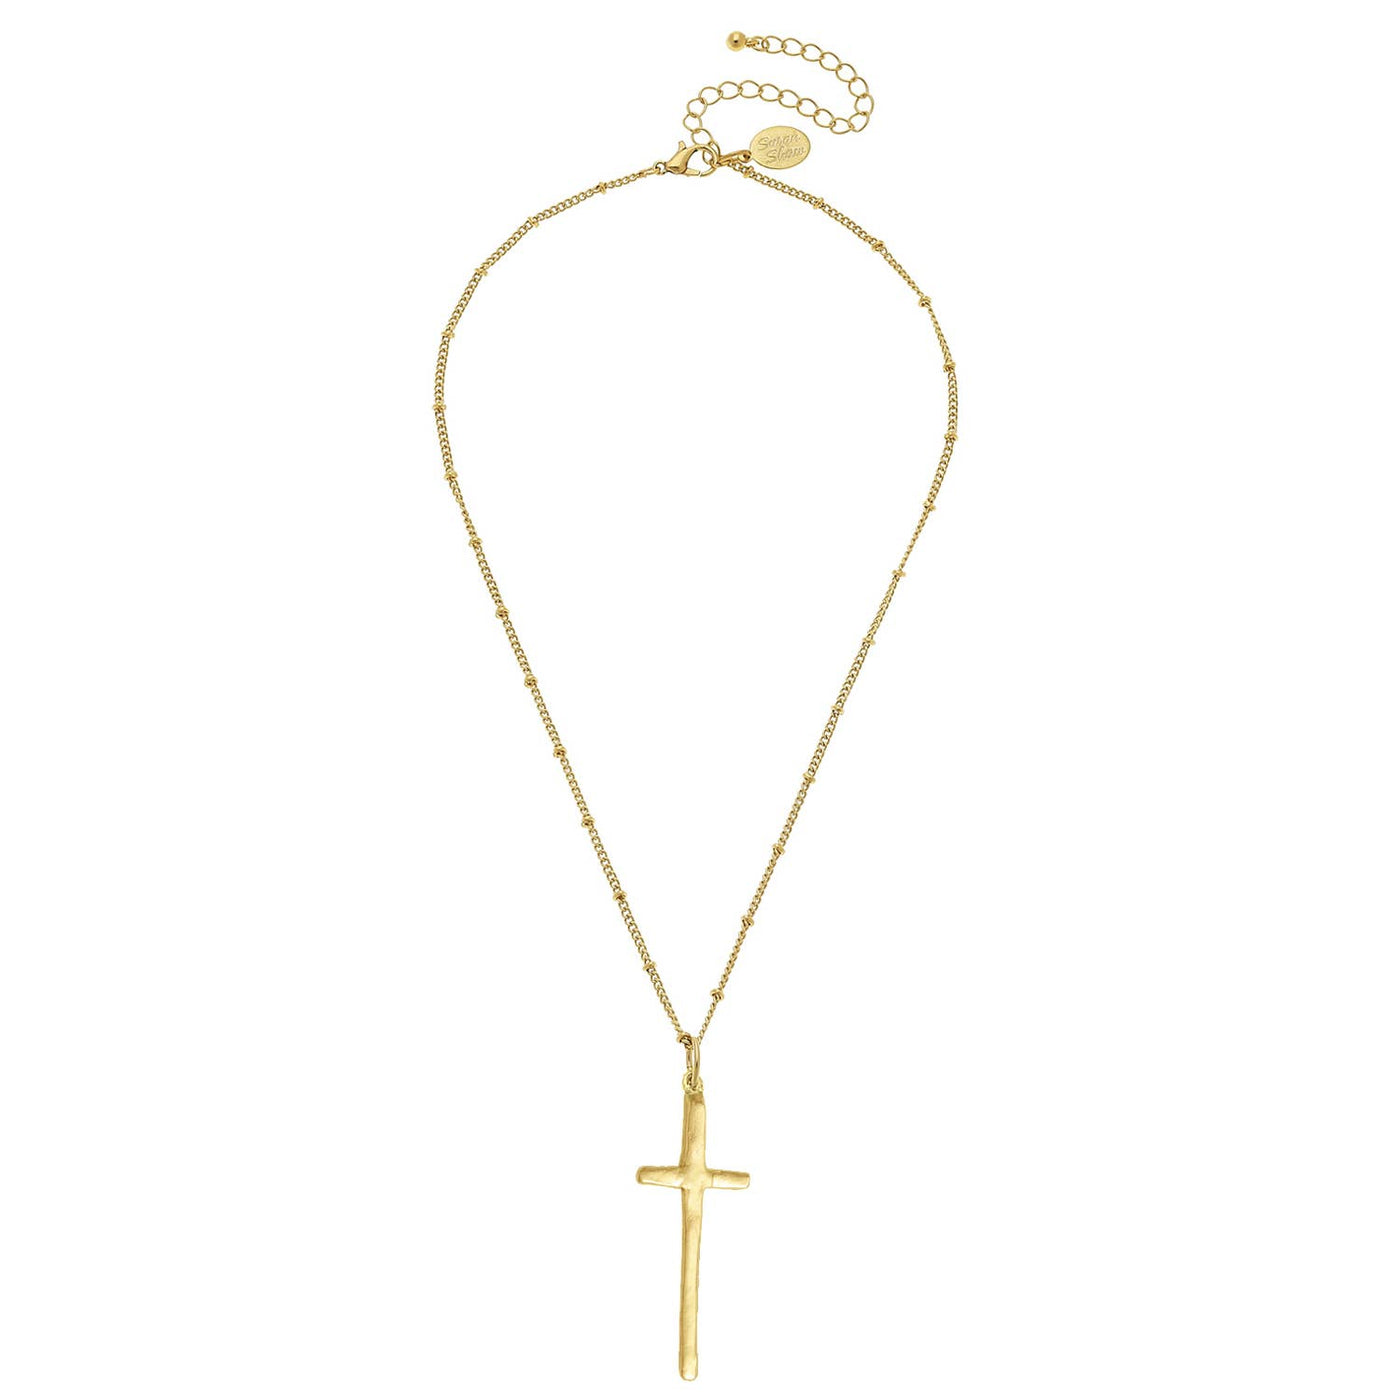 SS Dainty Elongated Cross Necklace